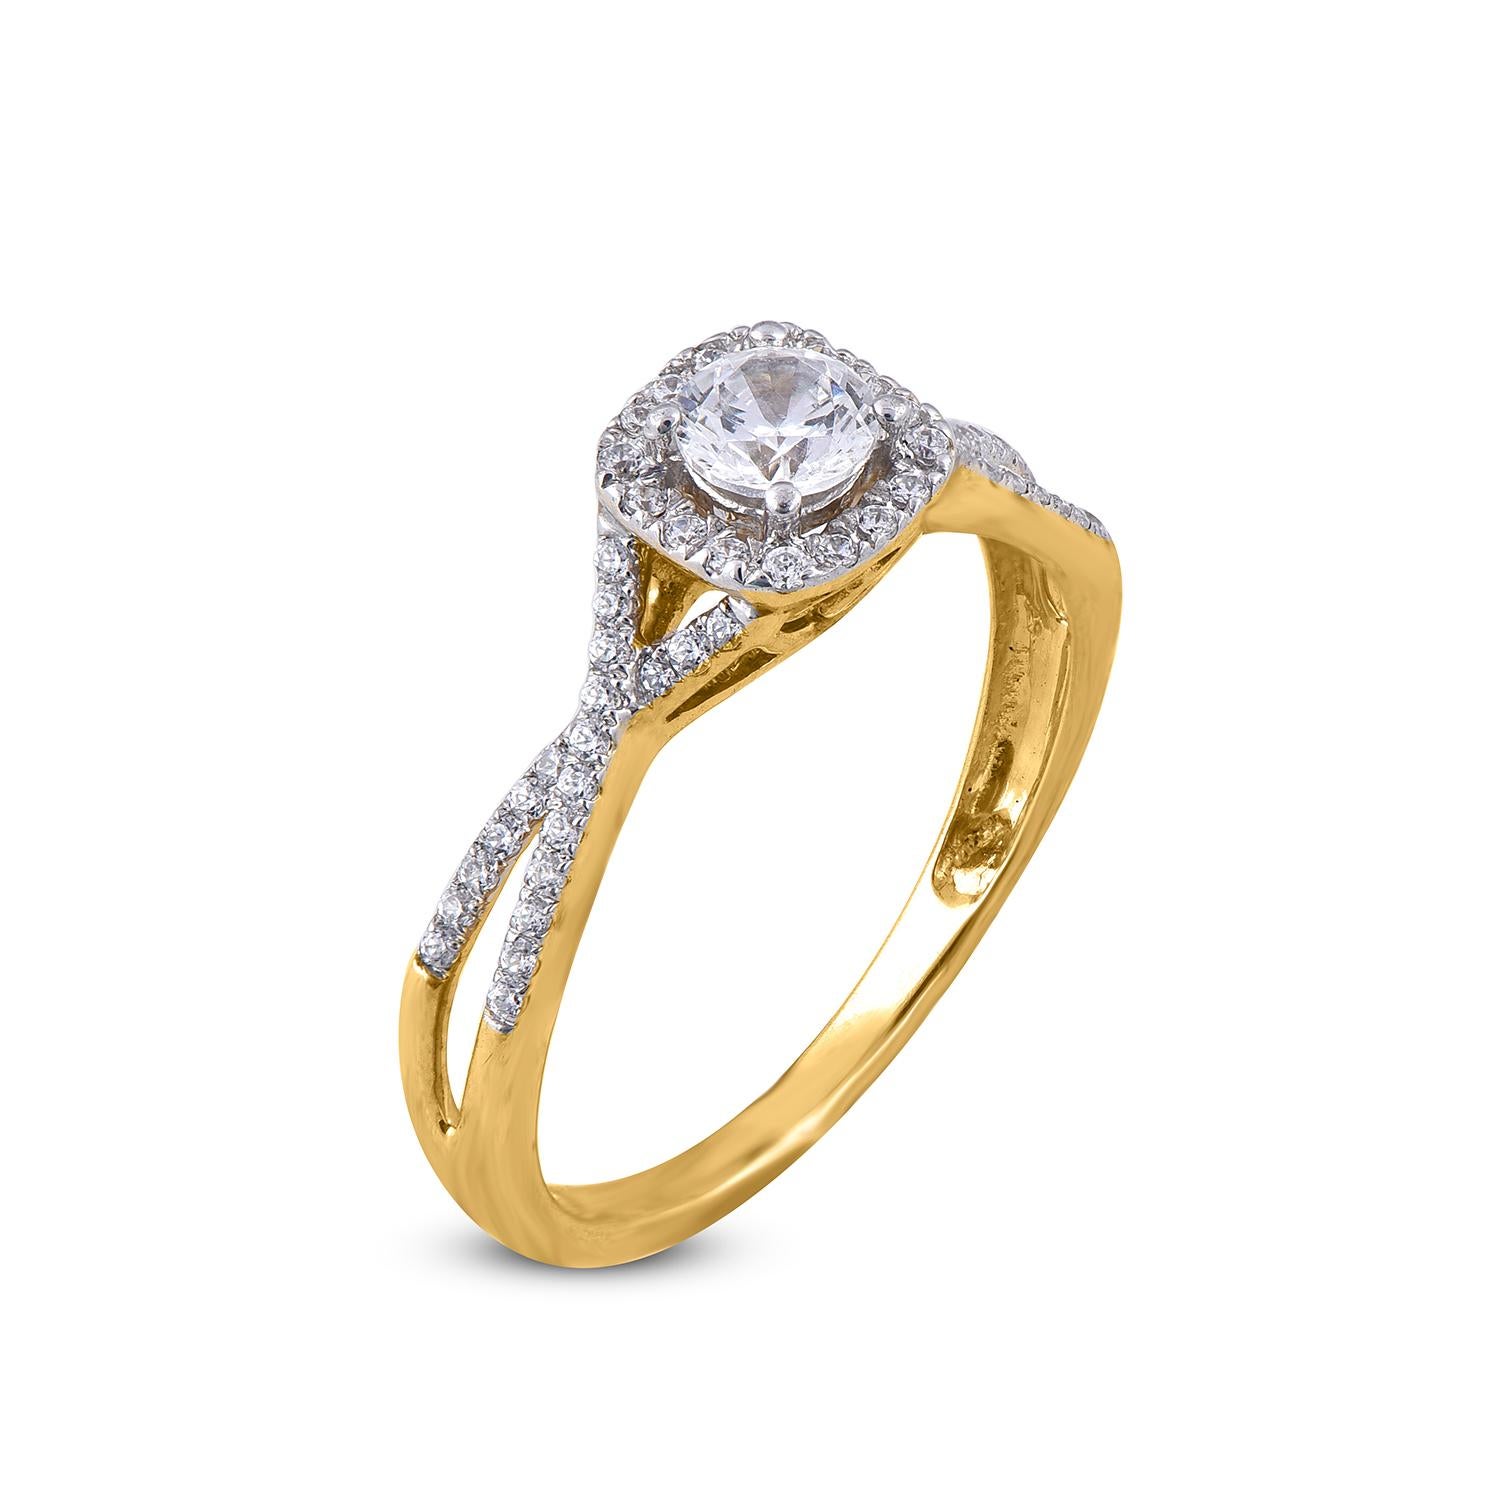 Truly exquisite, this diamond twisted shank engagement ring features in 0.30 ct of round centre stone and 0.20 ct of lined diamonds on shoulders. Expertly Crafted of sparkling 18 karat Yellow gold in high polish finish and set with 57 sparkling